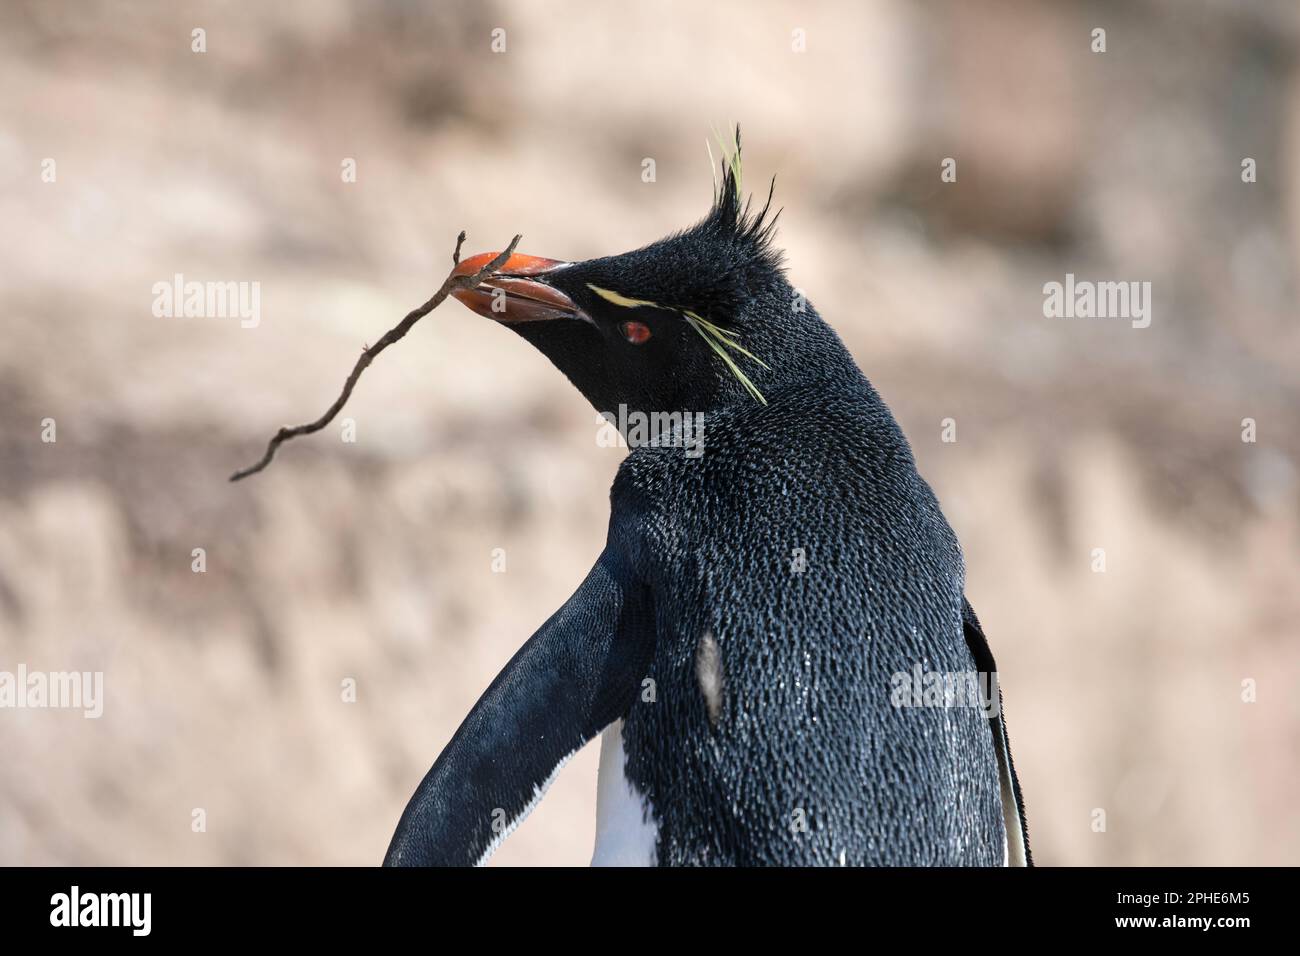 A Southern Rock Hopper Penquin, Eudyptes Chrysocome, carrying a stick at Saunders Island, part of The Falkland Islands. Stock Photo